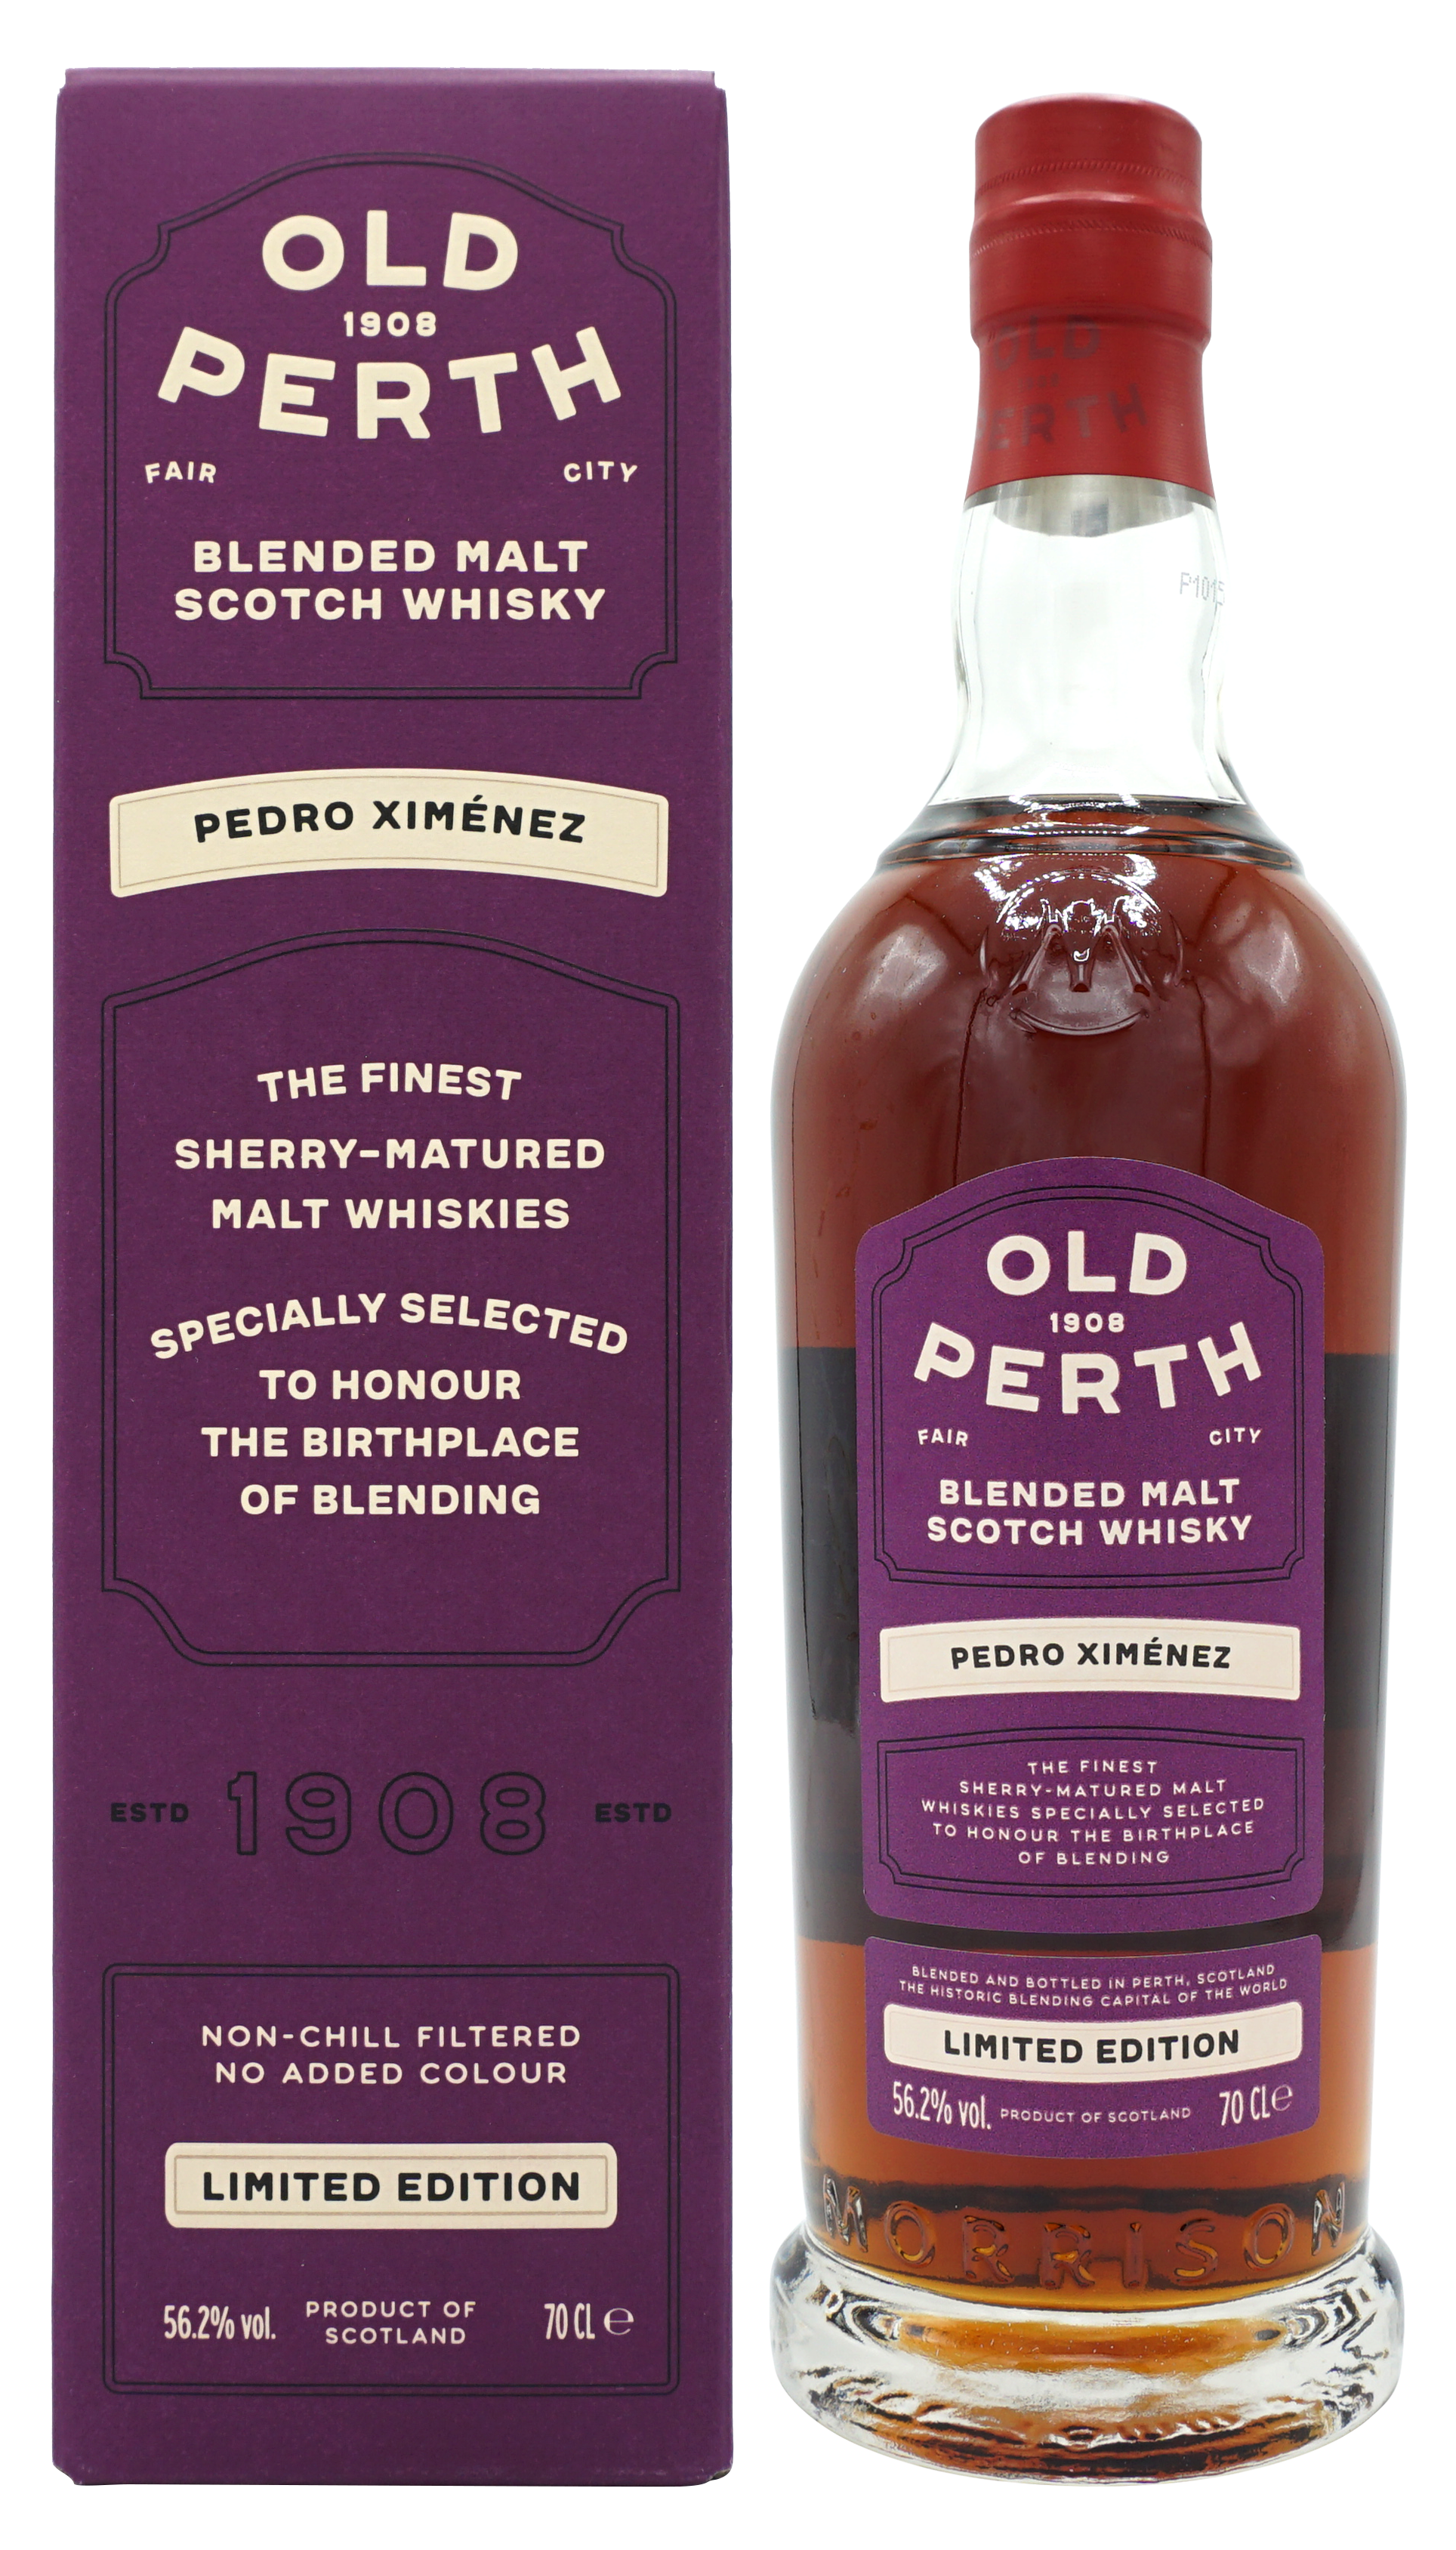 Old Perth Px Blended Malt 70cl 562 Compleet